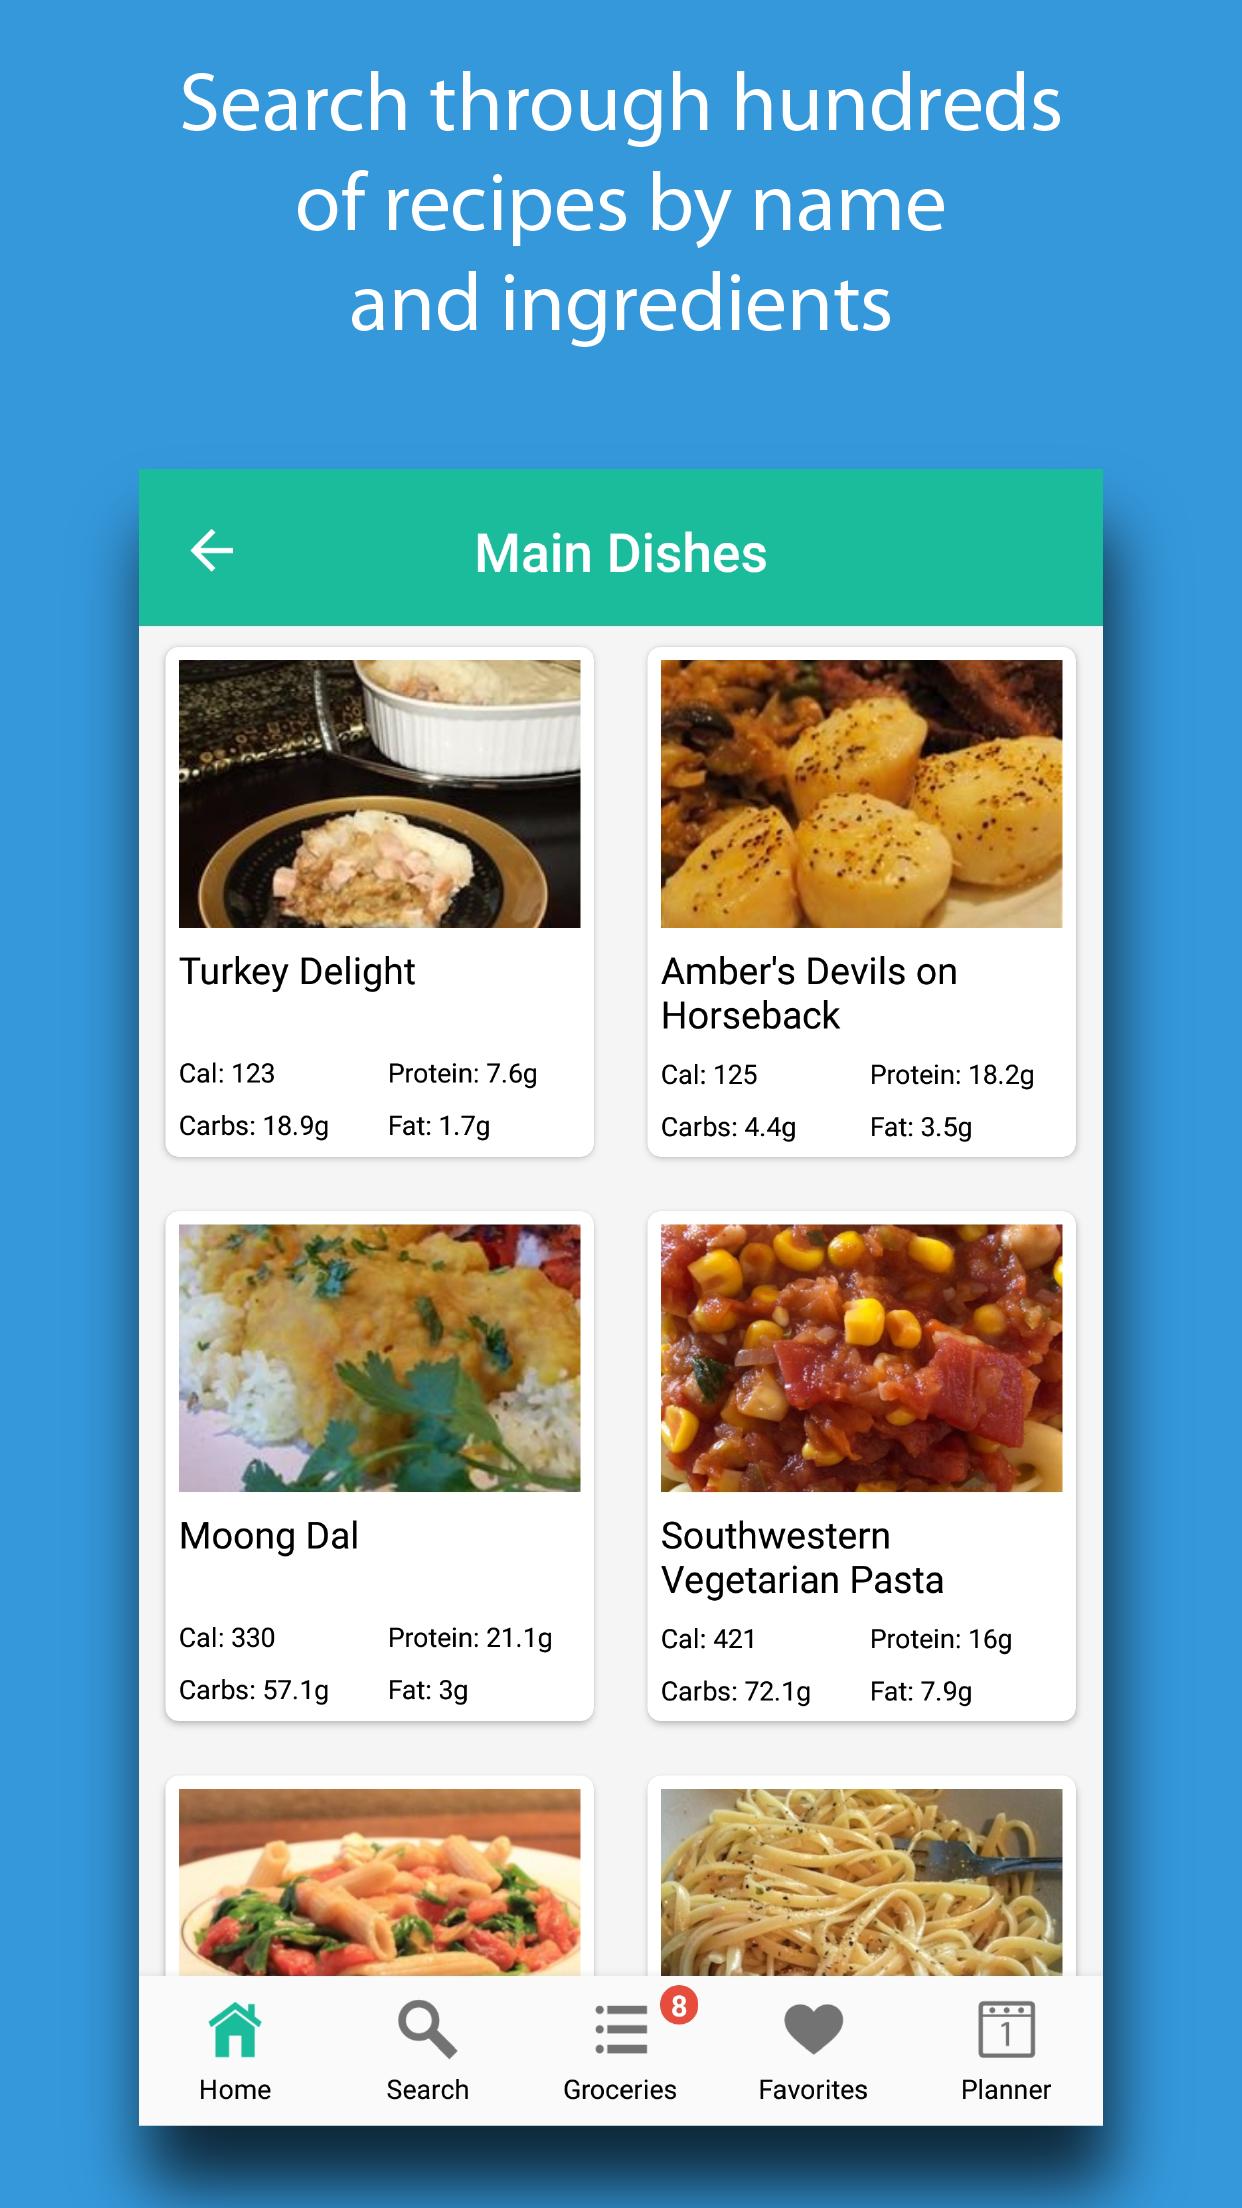 Low Cholesterol Recipes For Android Apk Download